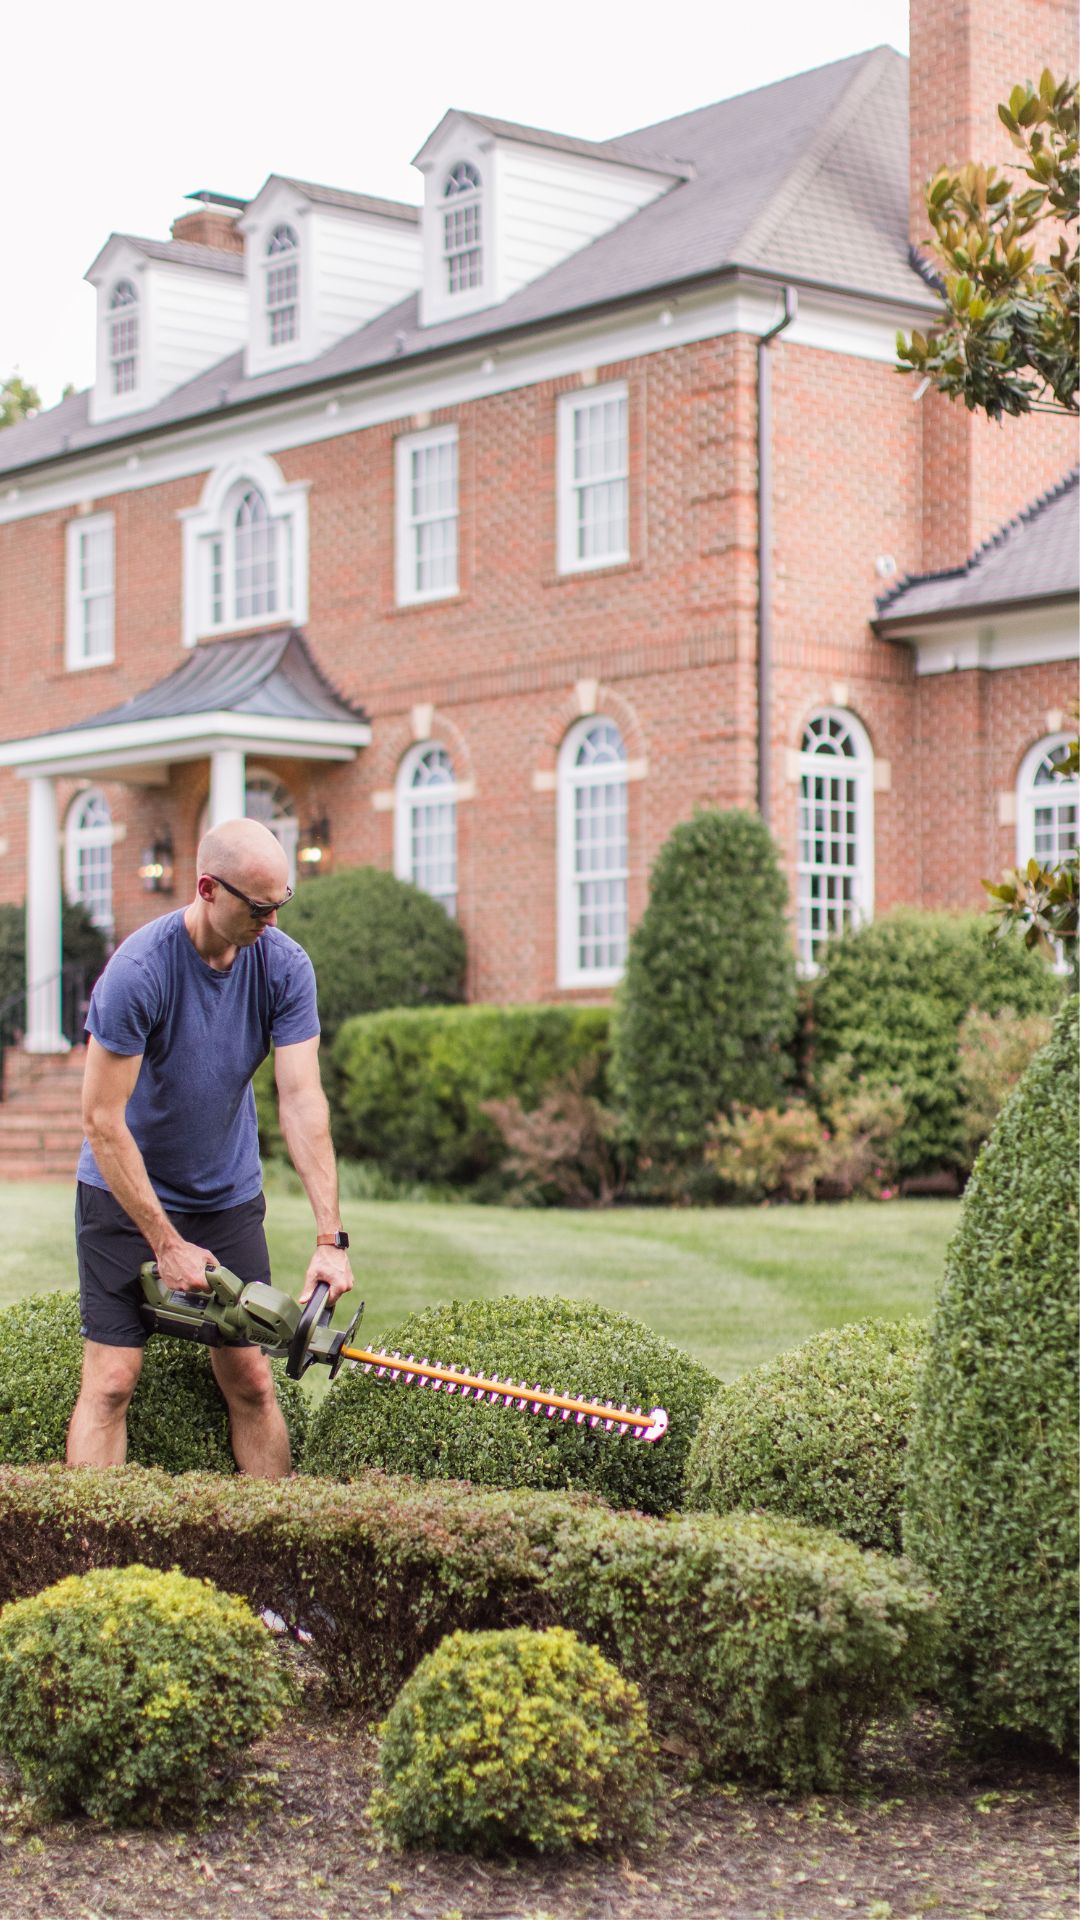 The Green Machine Hedge Trimmer cutting the bushes in front of The Arched Manor